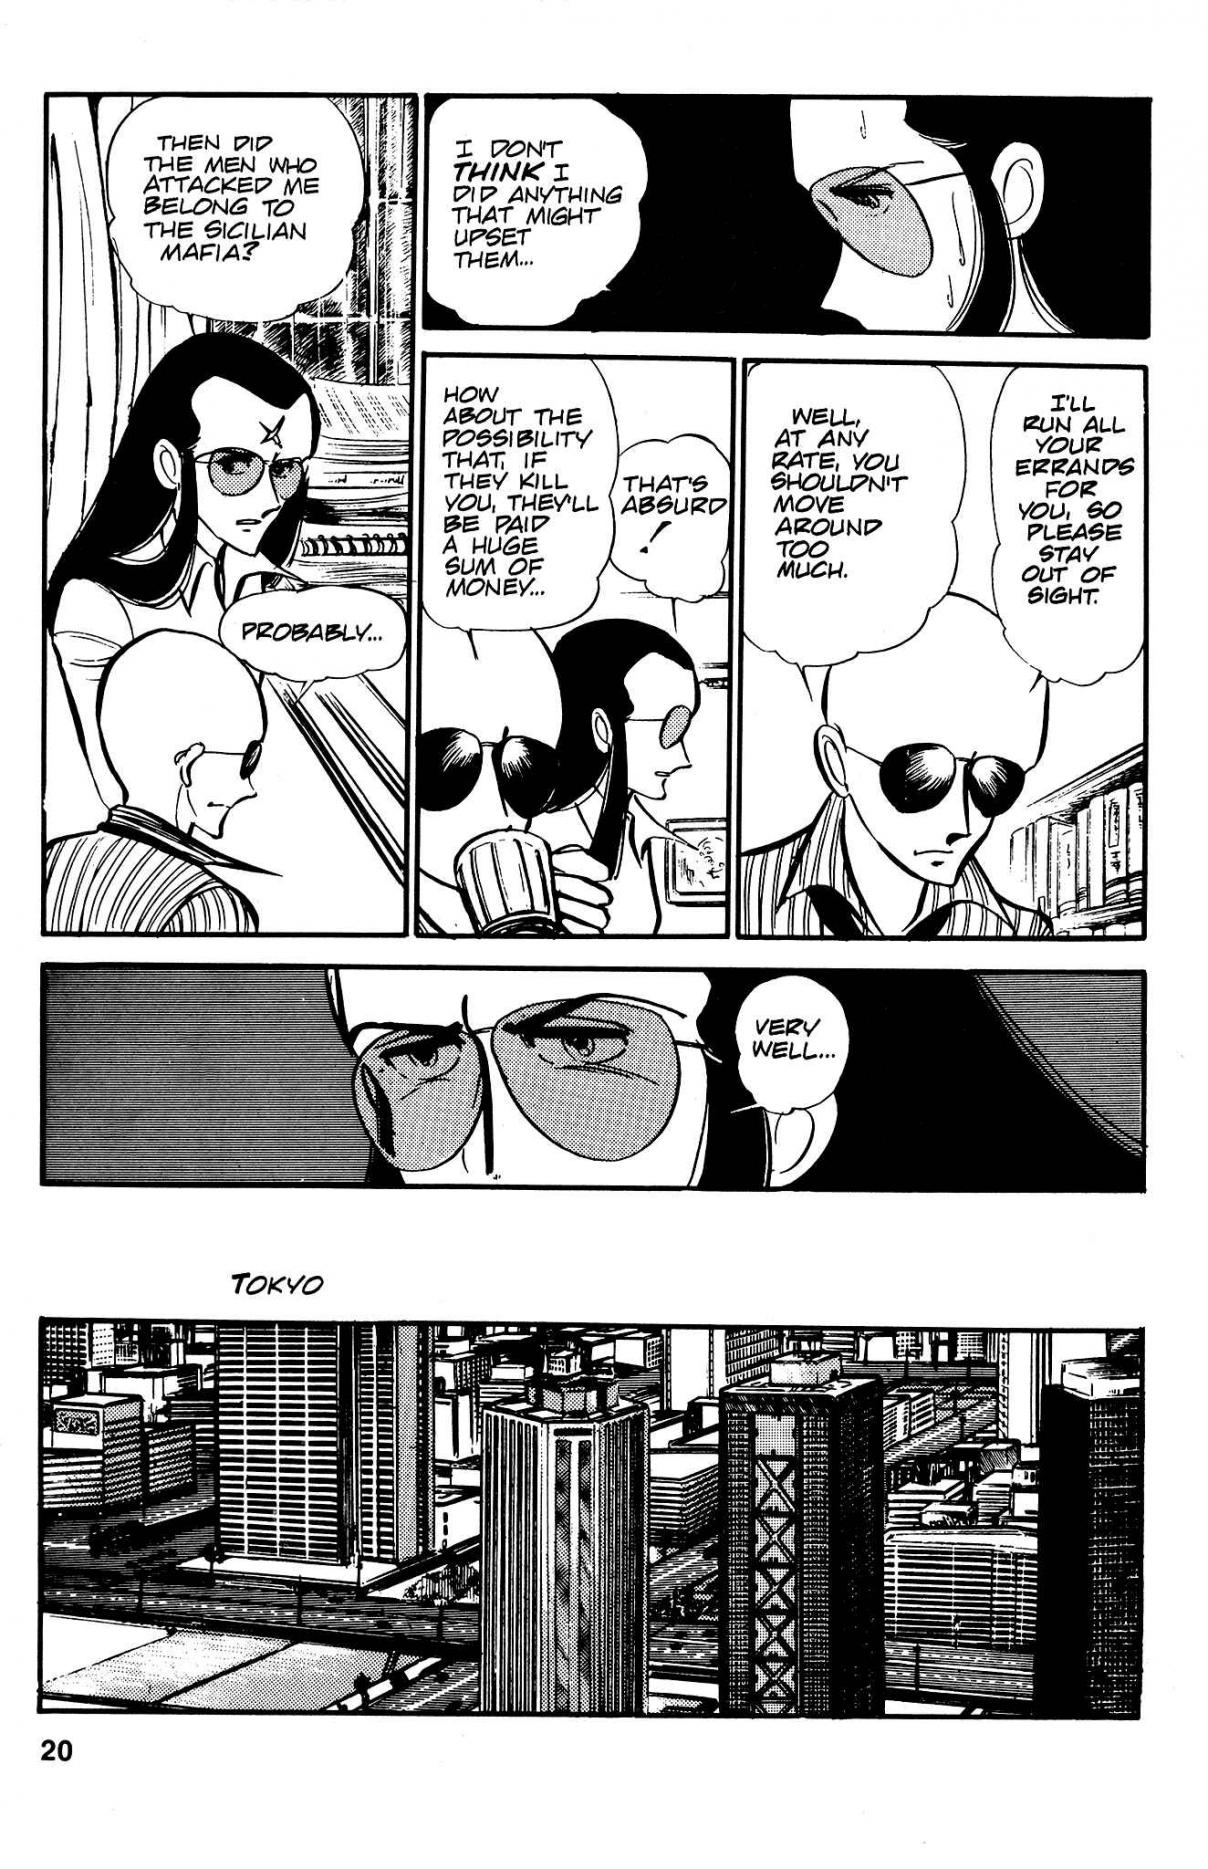 Area 88 Vol. 3 Ch. 35 The Dark Cloud of Intrigue